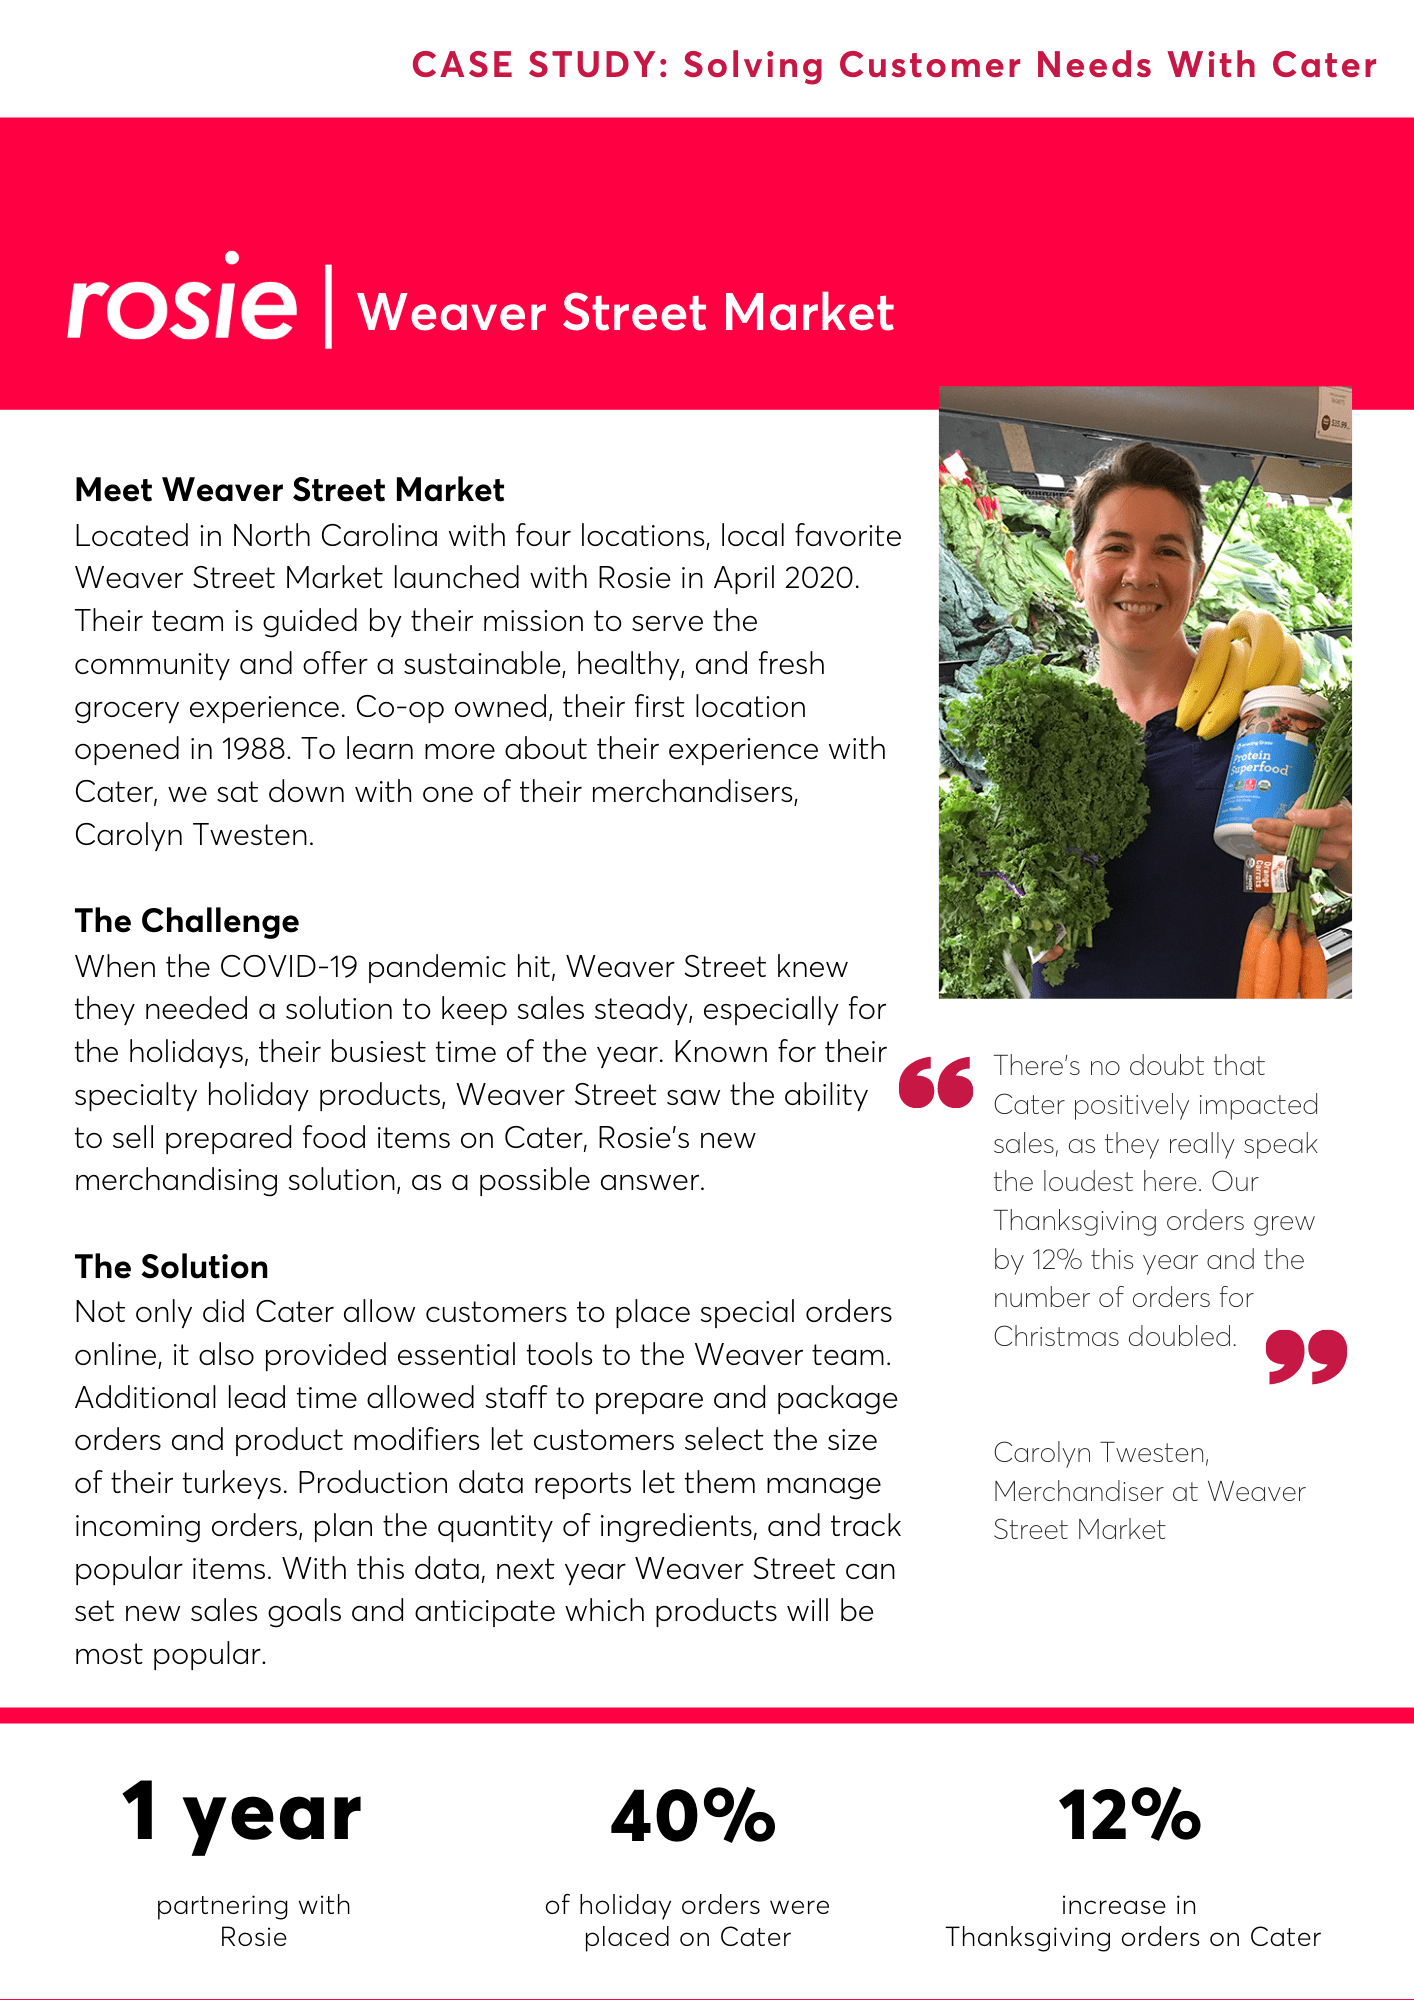 First page of Weaver Street Market Case Study. Meet Weaver Street Market, The Challenge, and The Solution